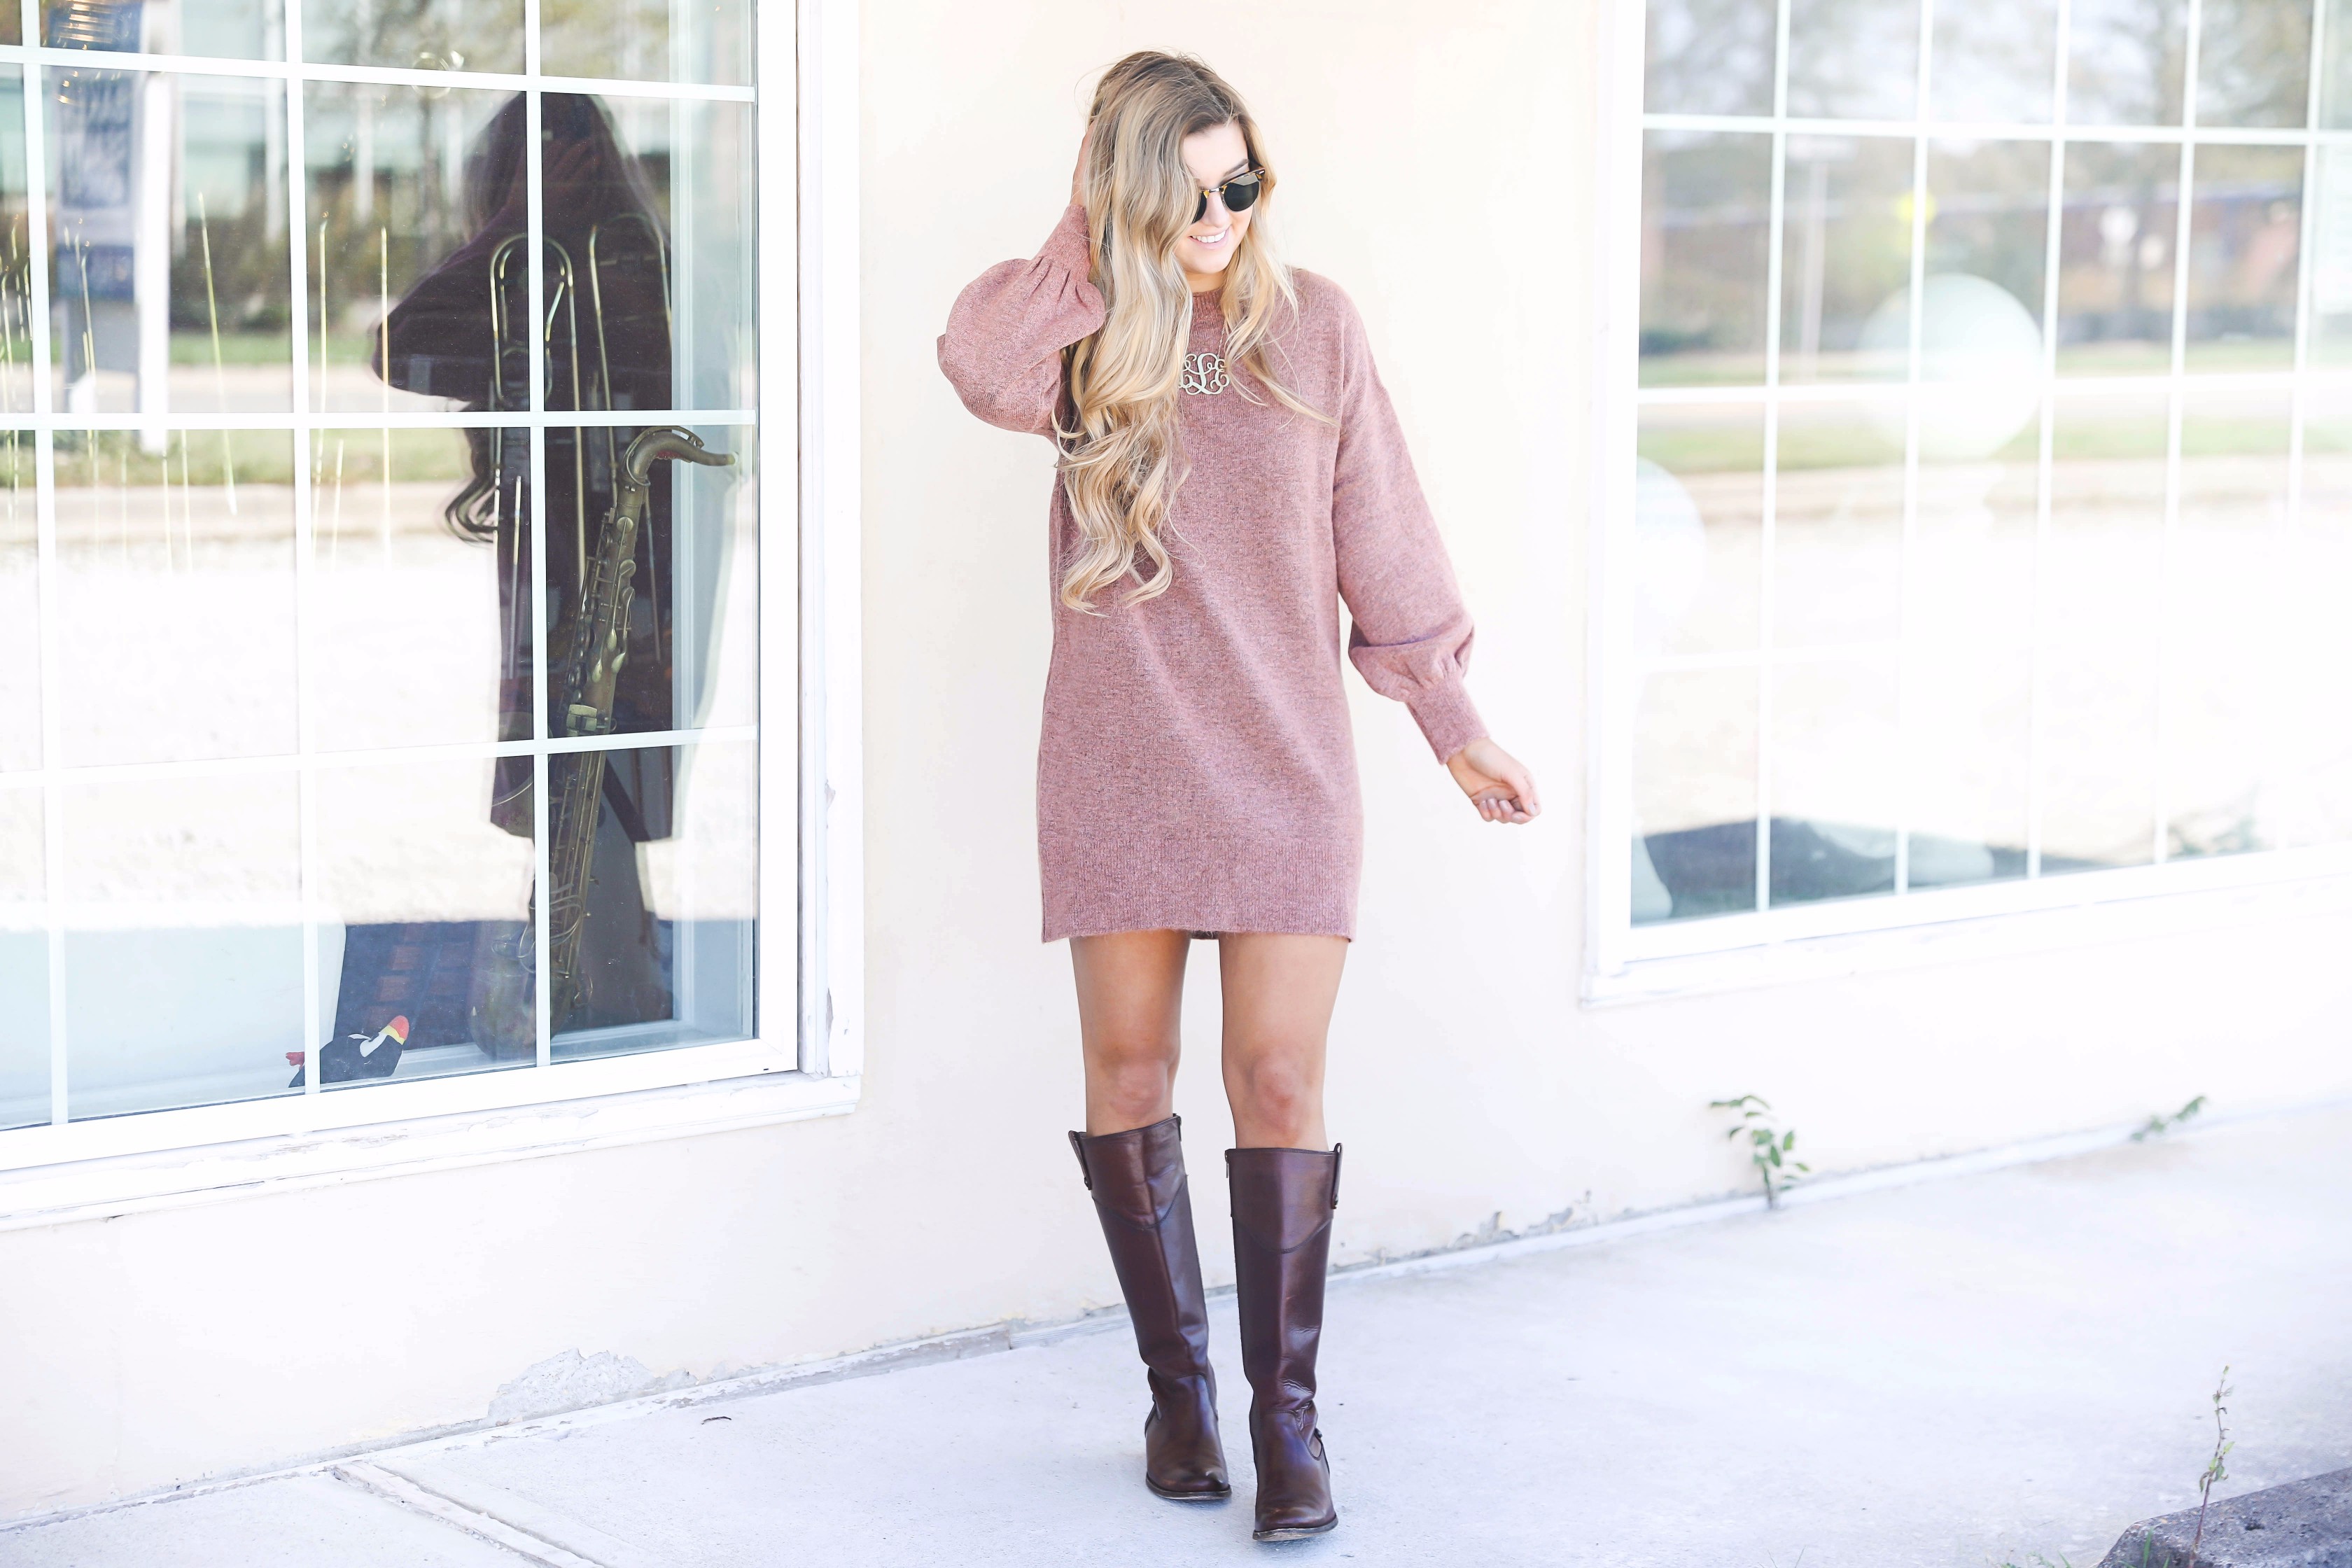 sweater dress with leggings and boots - By Lauren M